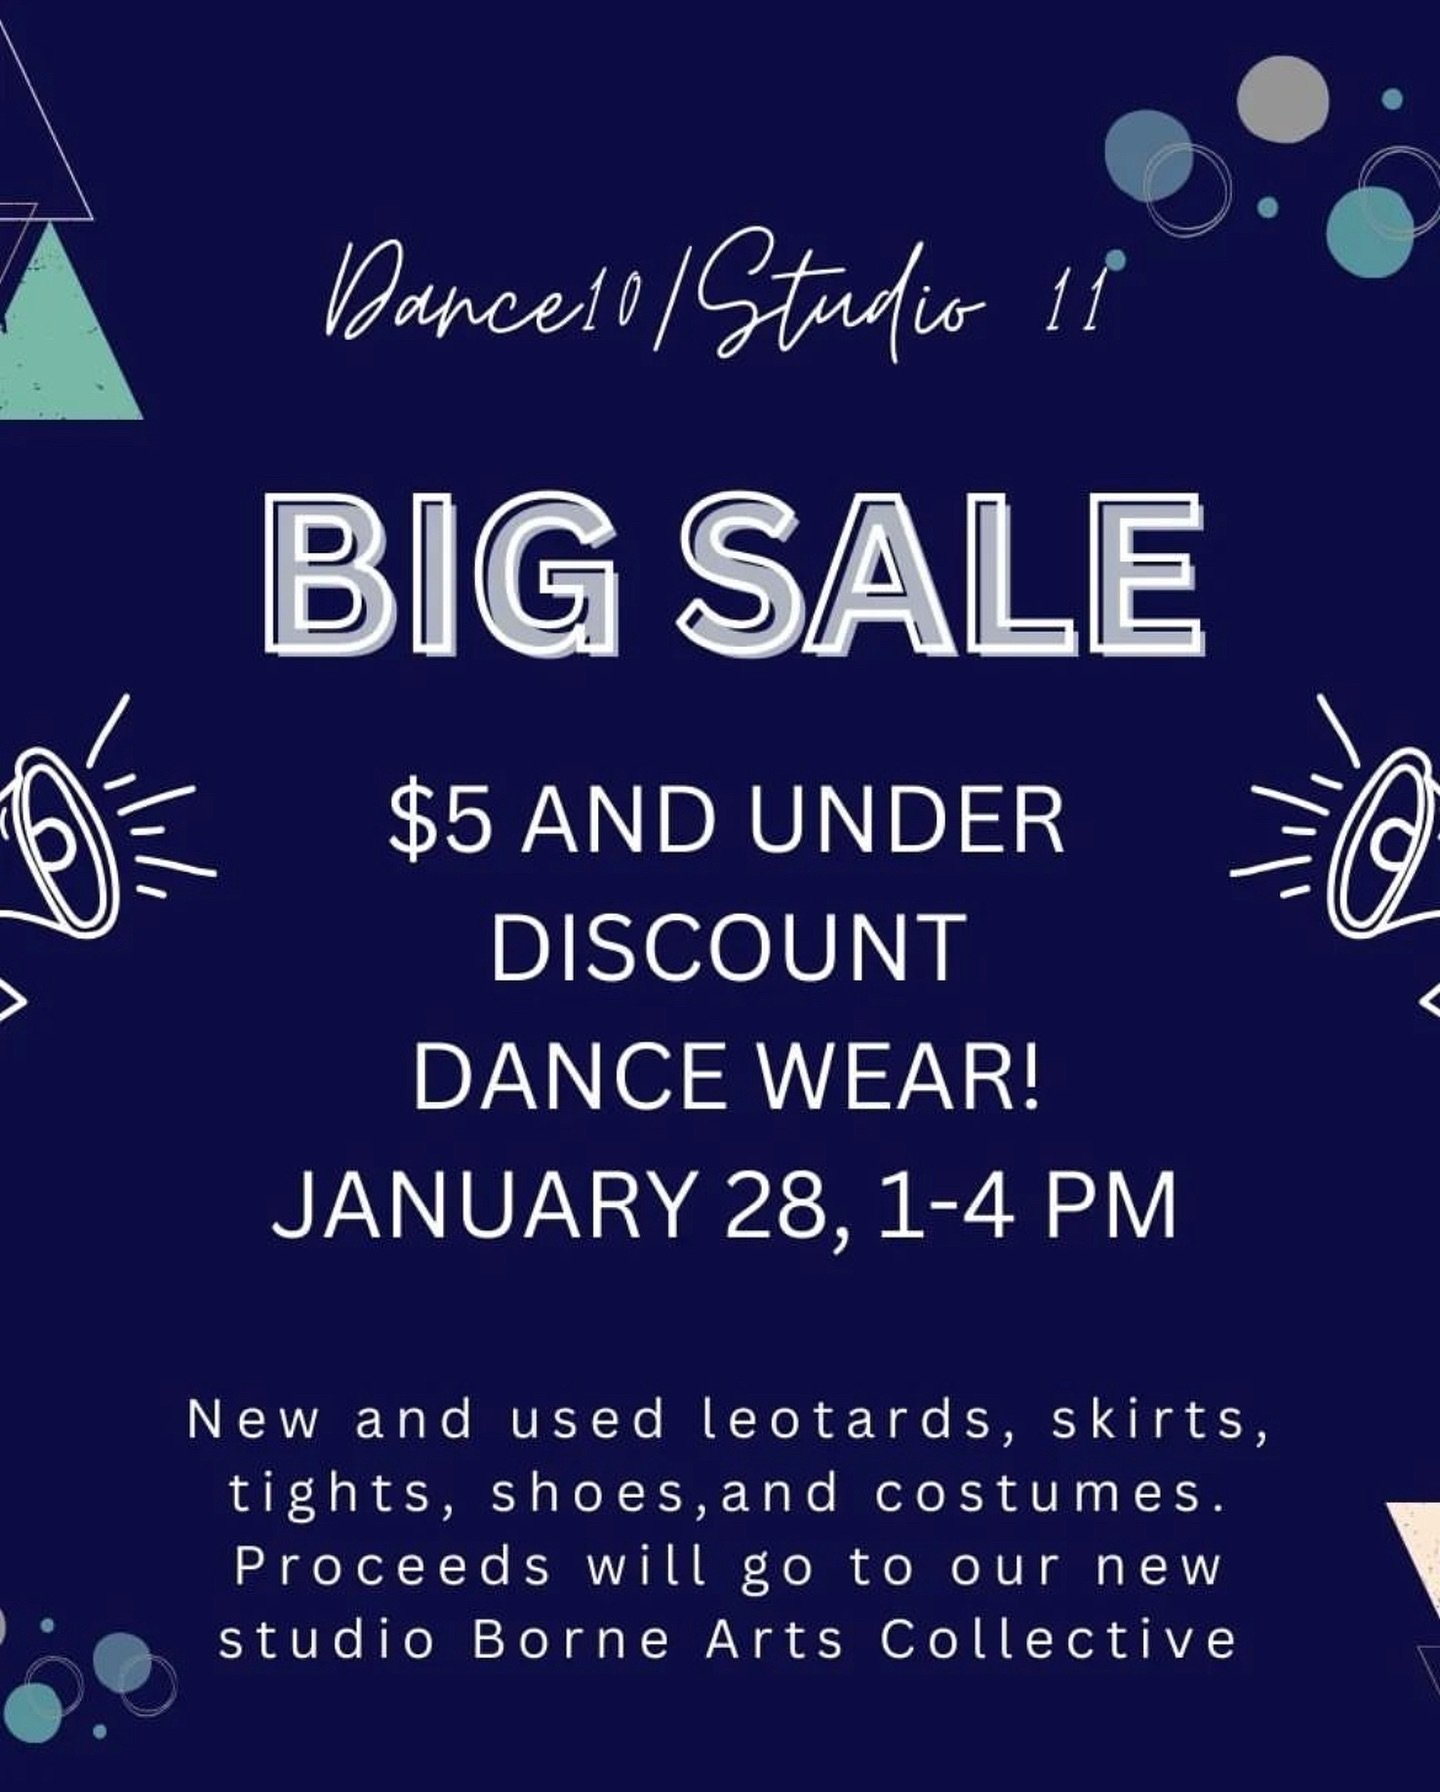 This Sunday at @studio11sacramento!! ✨ 

@borneartscollective is selling pieces from their HUGE collection of Dancewear and costumes for $5 and under! Come purchase new and gently used leotards,
tights, shoes and costumes. 

This is a great way to up